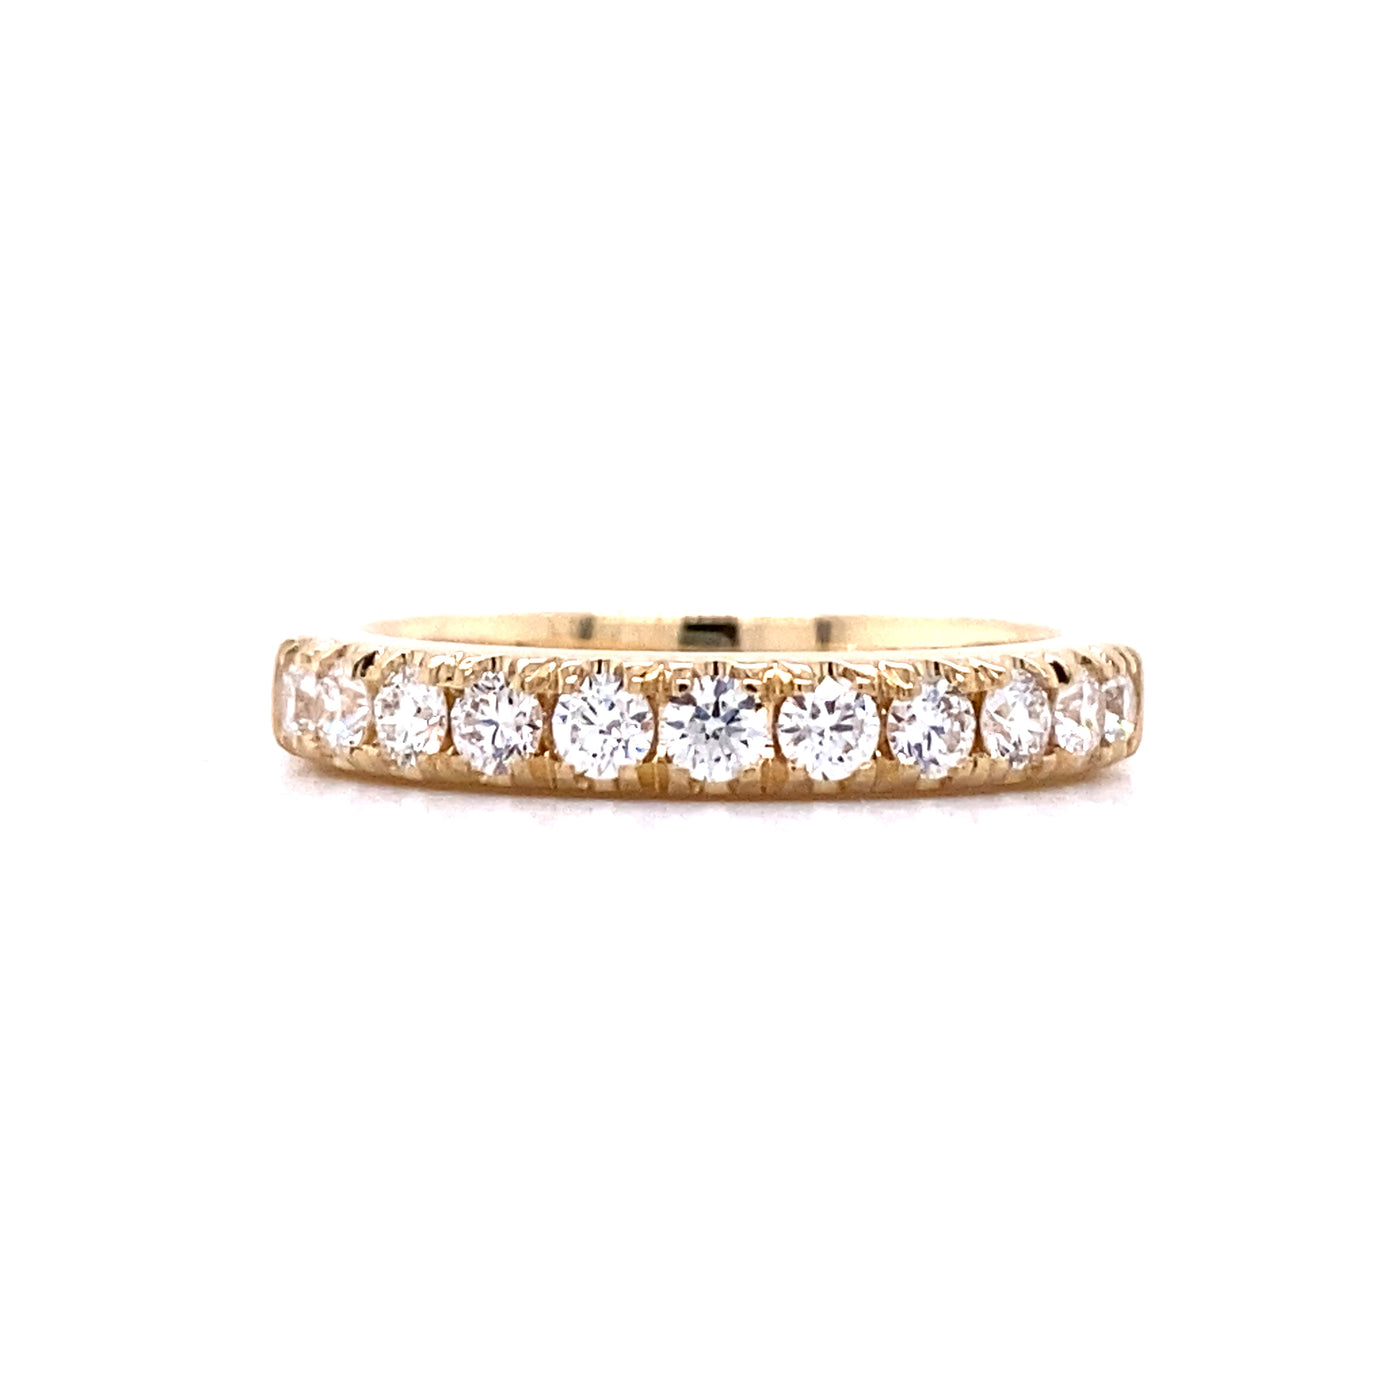 Beeghly & Co. 14 Karat Yellow Gold 1/2 Carat Diamond Band - Women's BCR-7-50Y